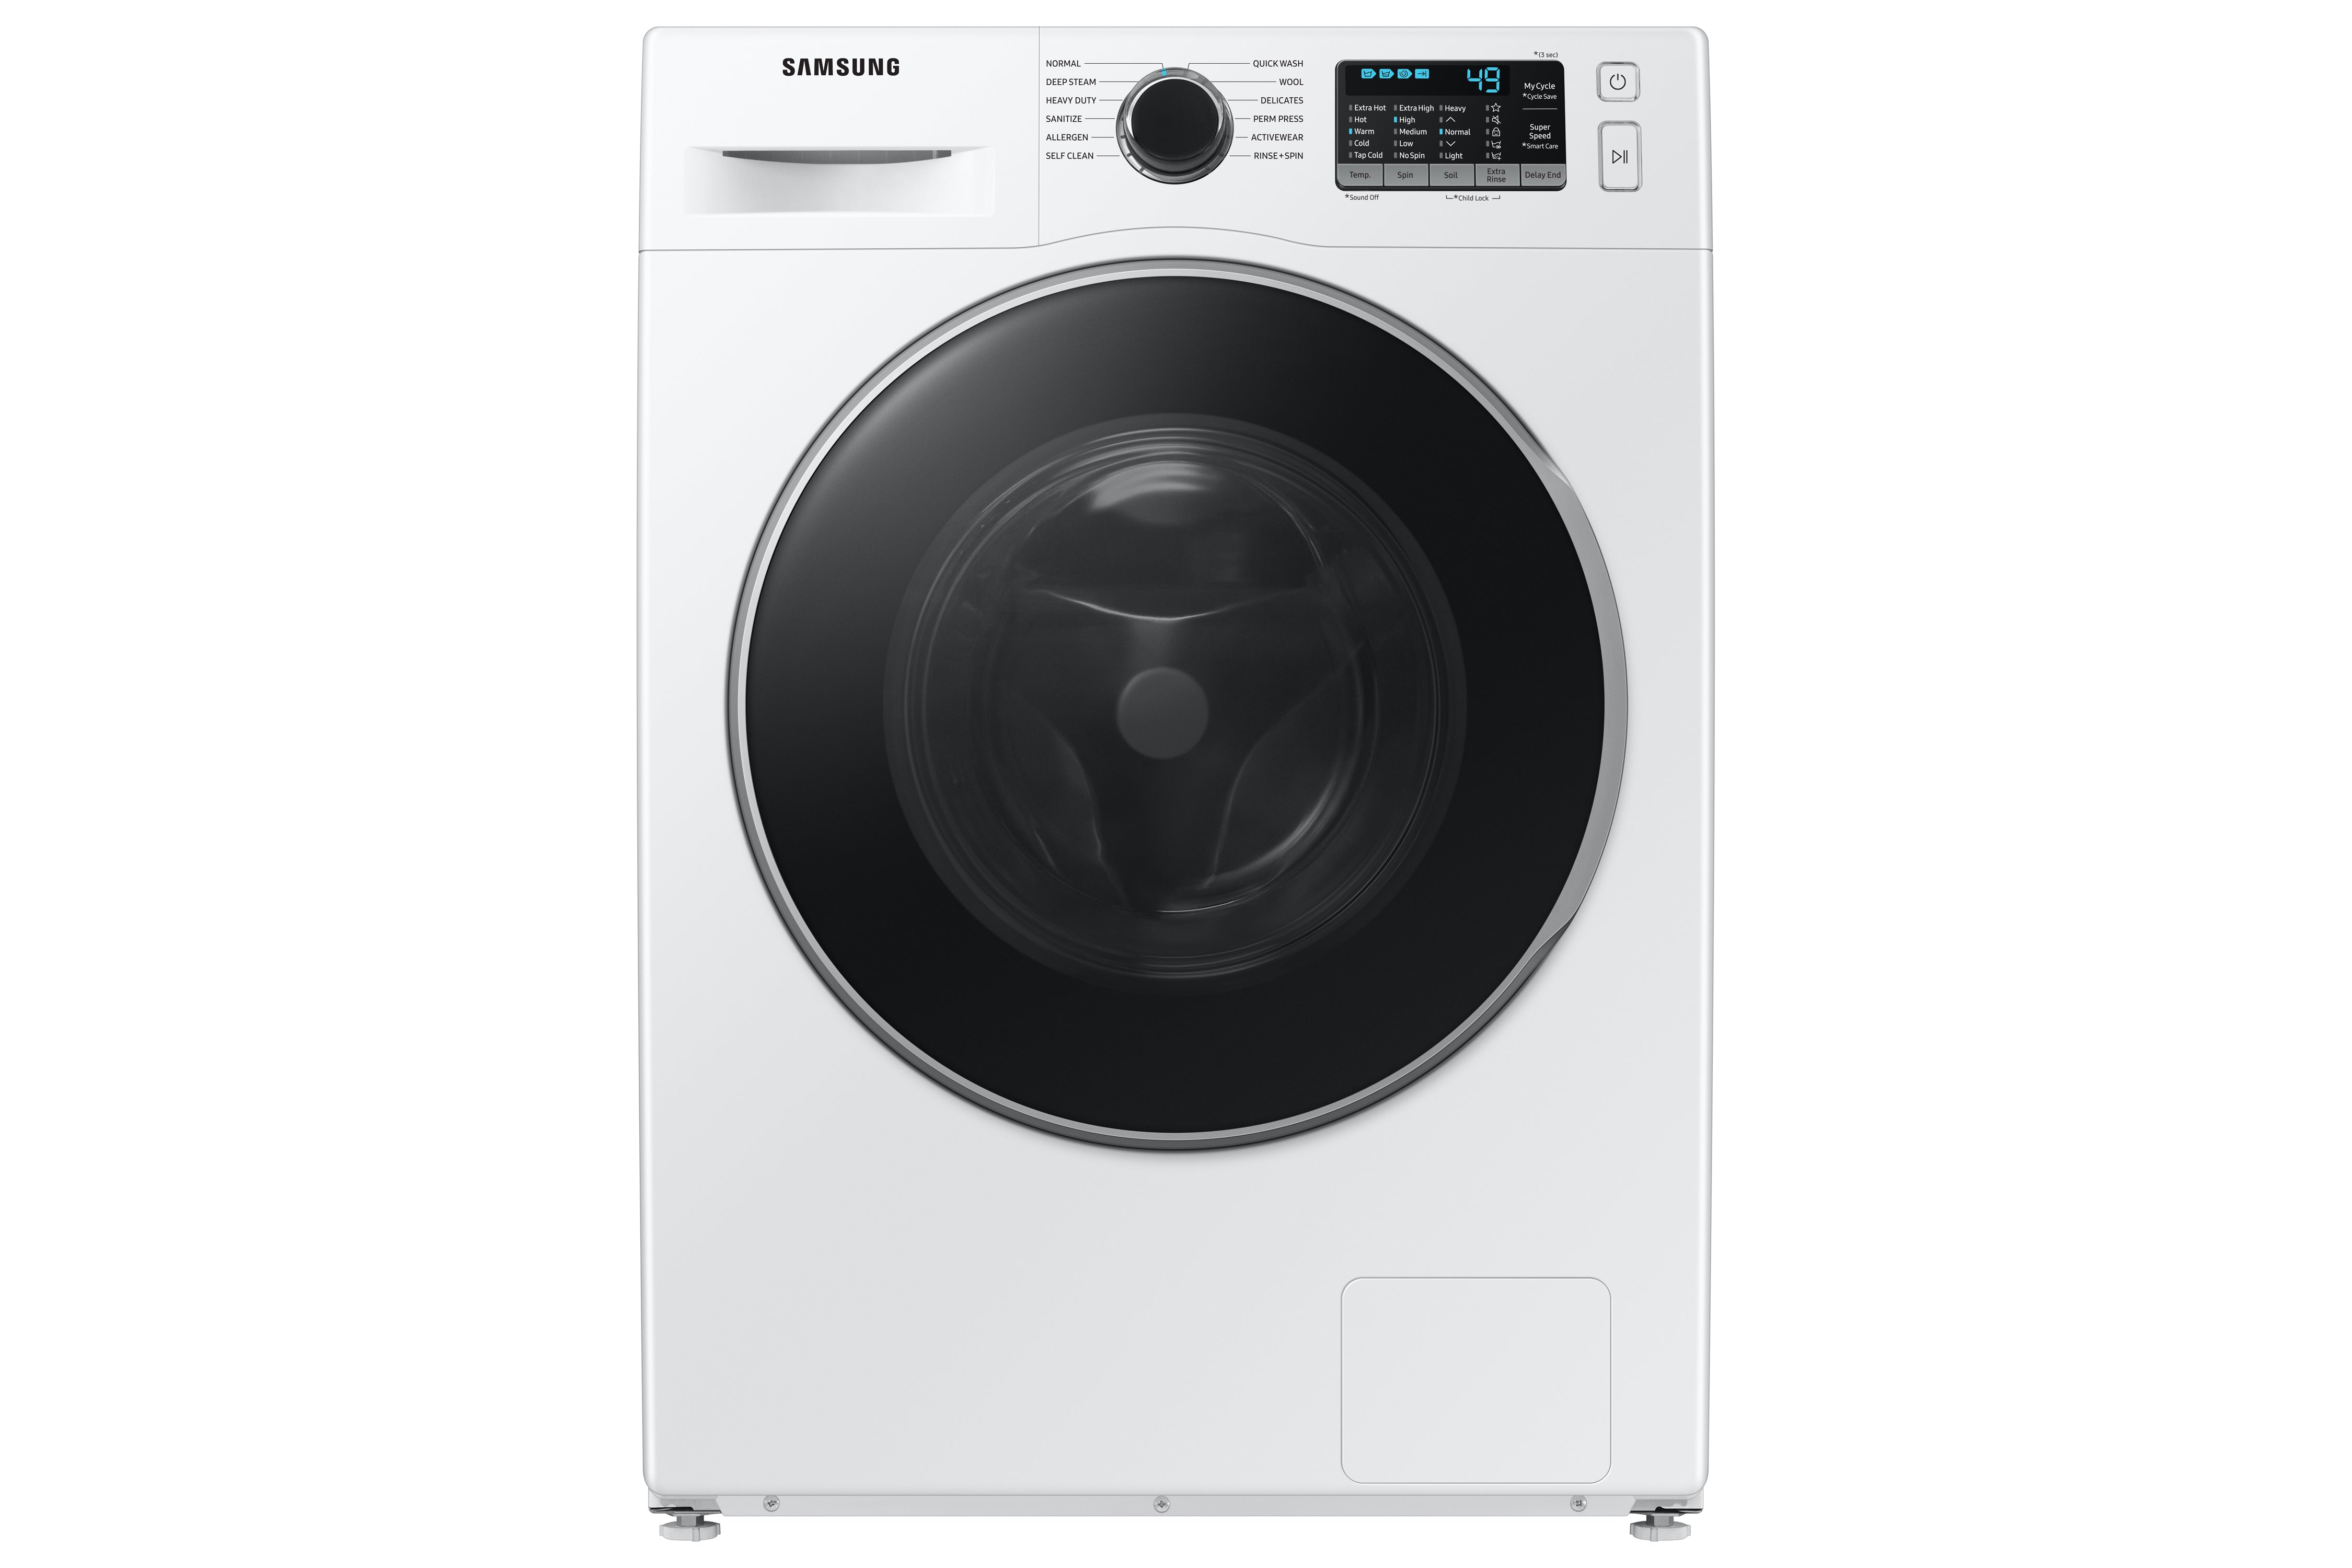 Samsung - 2.9 cu. Ft  Front Load Washer in White - WW25B6800AW